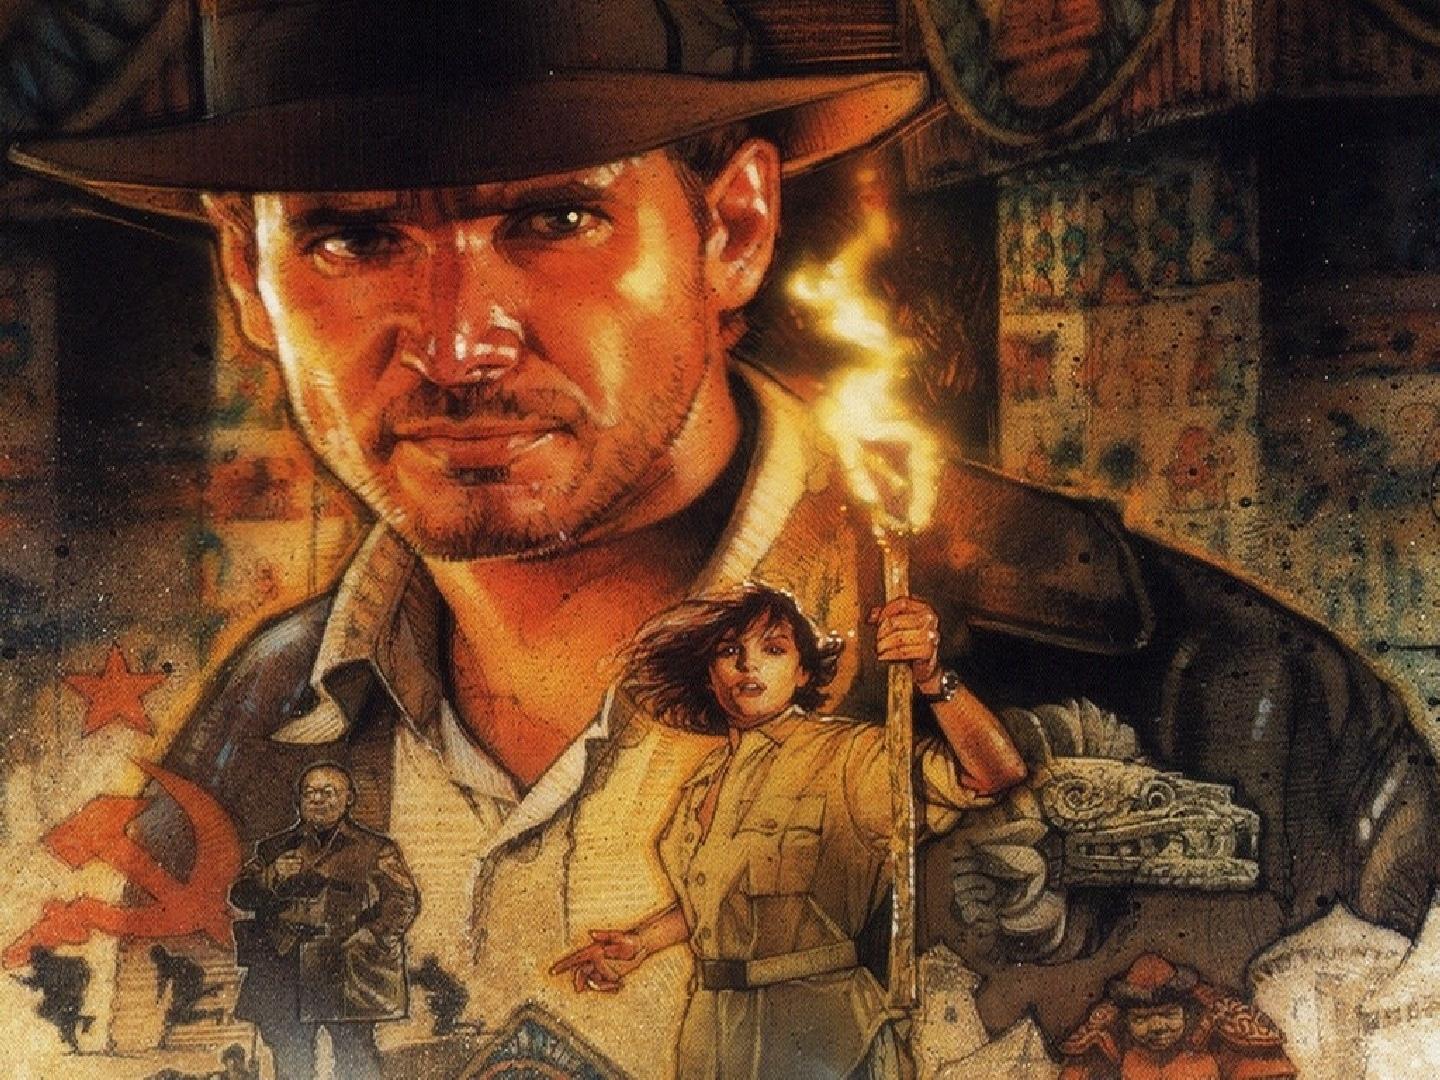 Raiders Of The Lost Ark wallpapers HD quality